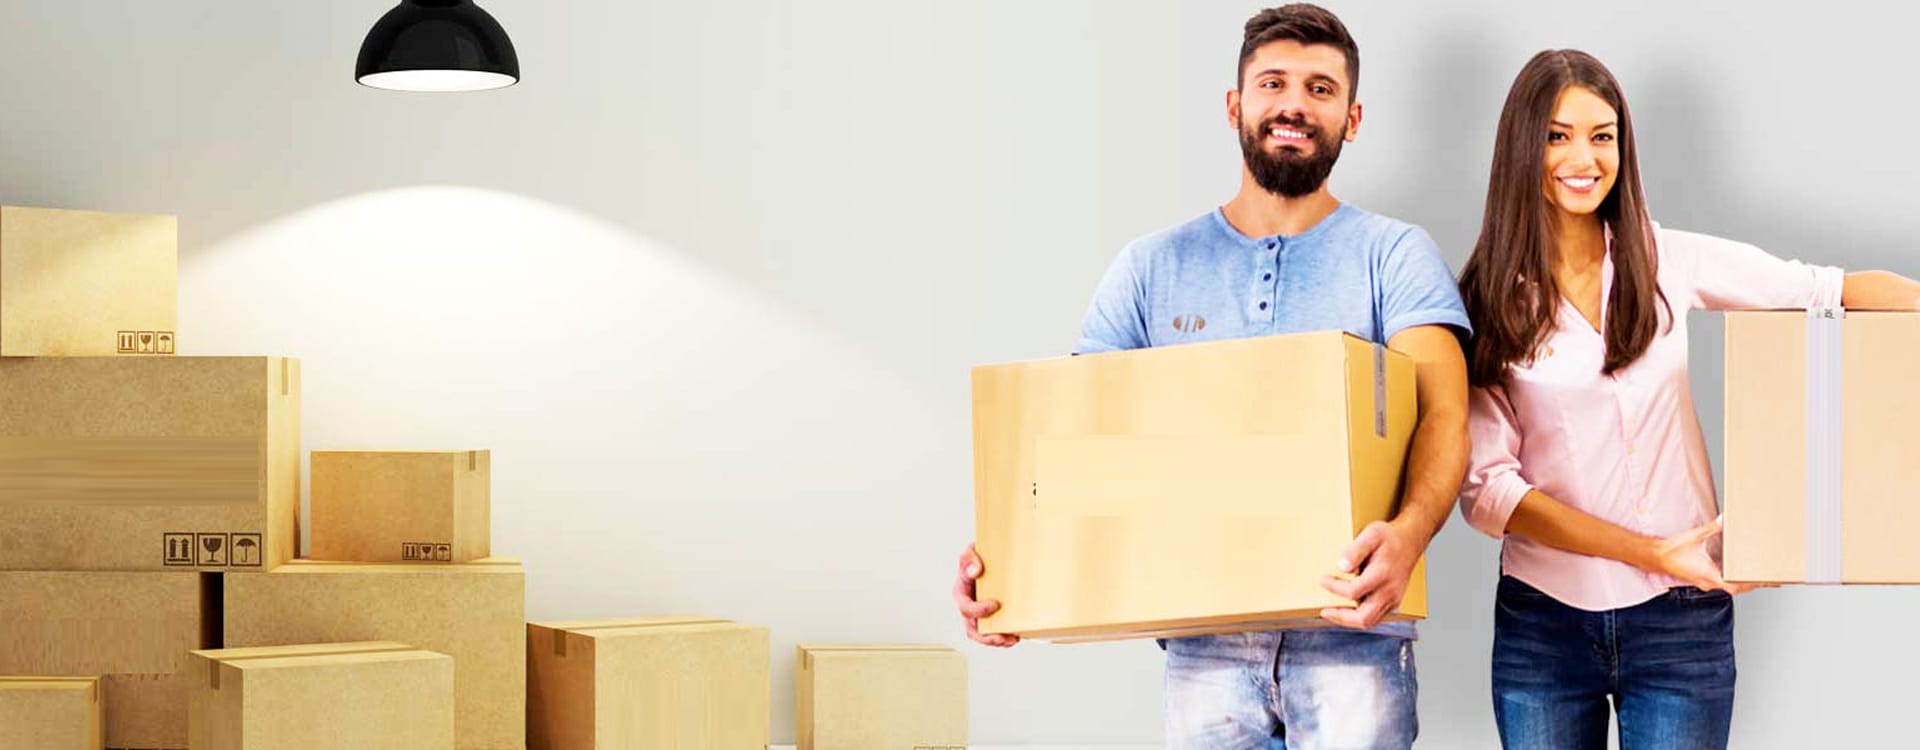 4 Things to Consider Before Hiring Any Moving Company